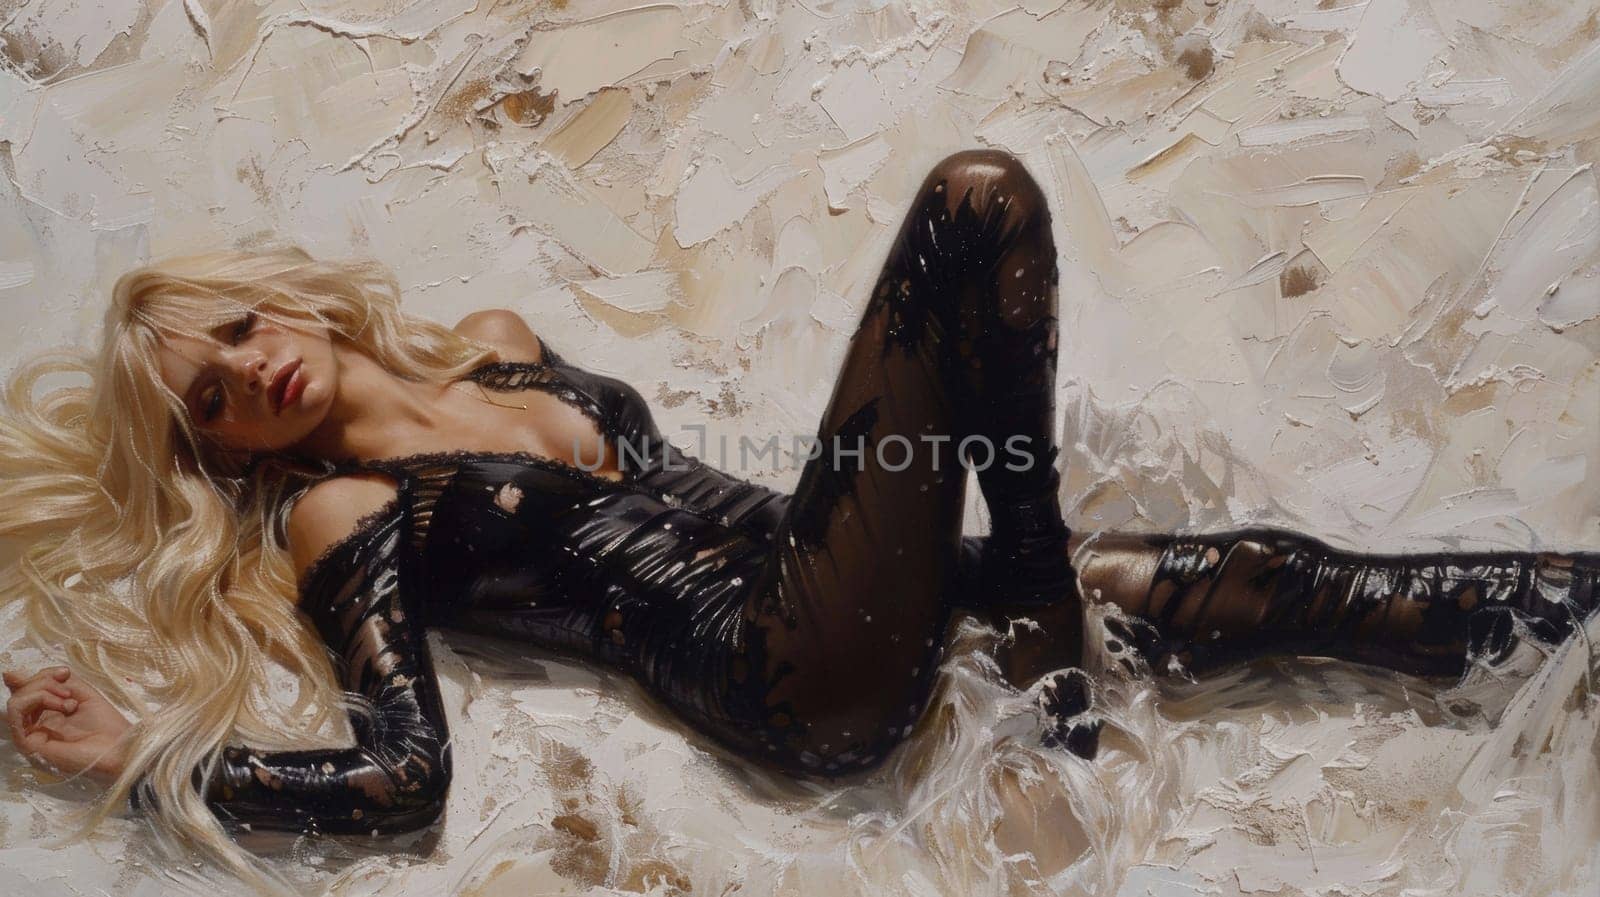 A woman laying on the floor in a black outfit